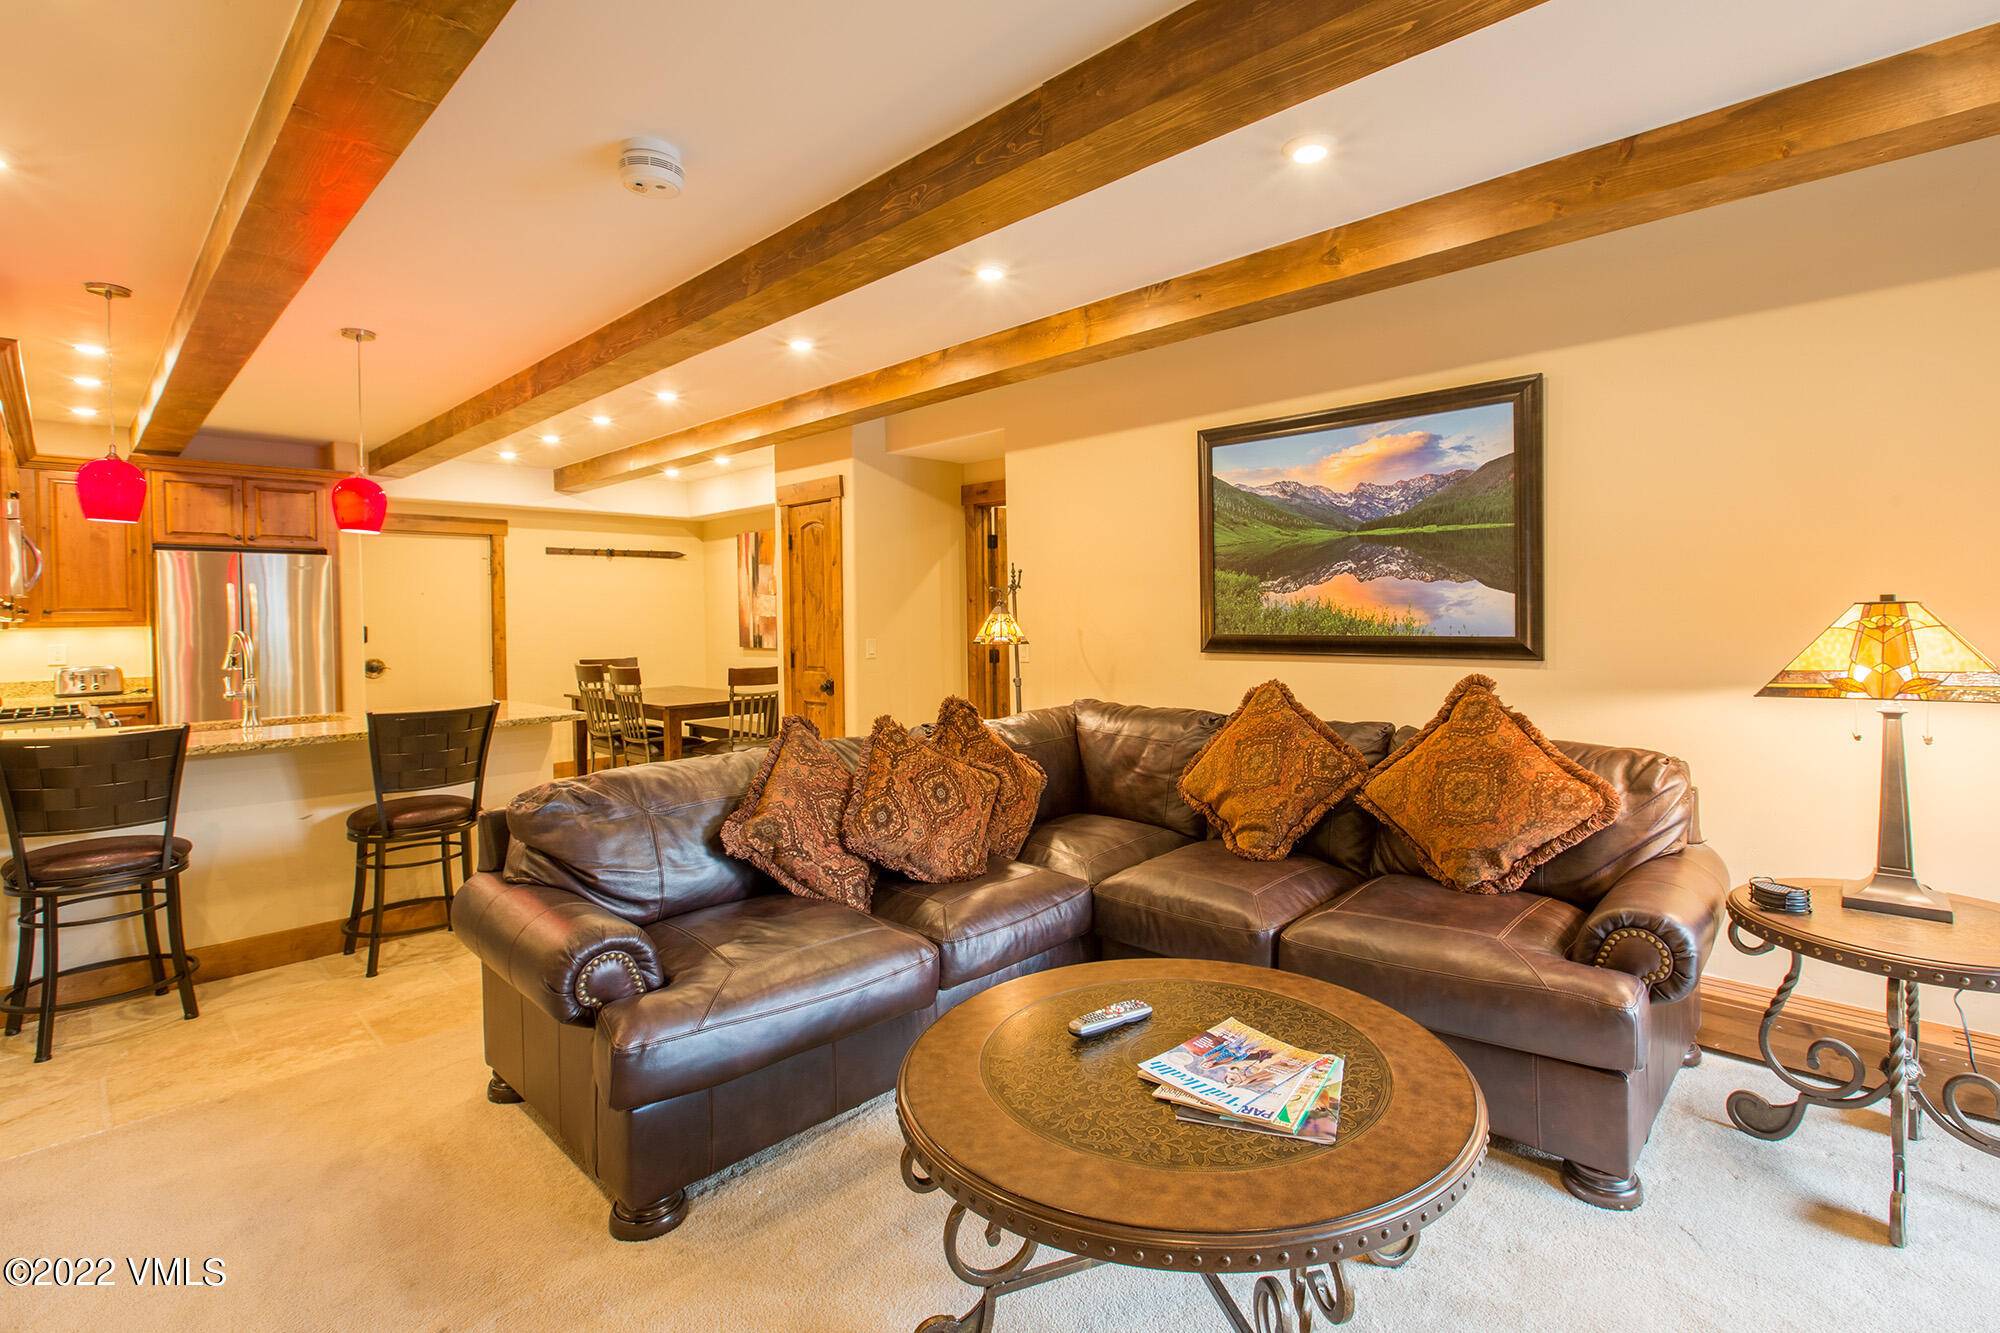 Large 2 bedroom in the heart of Vail Villages surrounded by Vail Village's 5 star hotel and steps to restaurants shops.